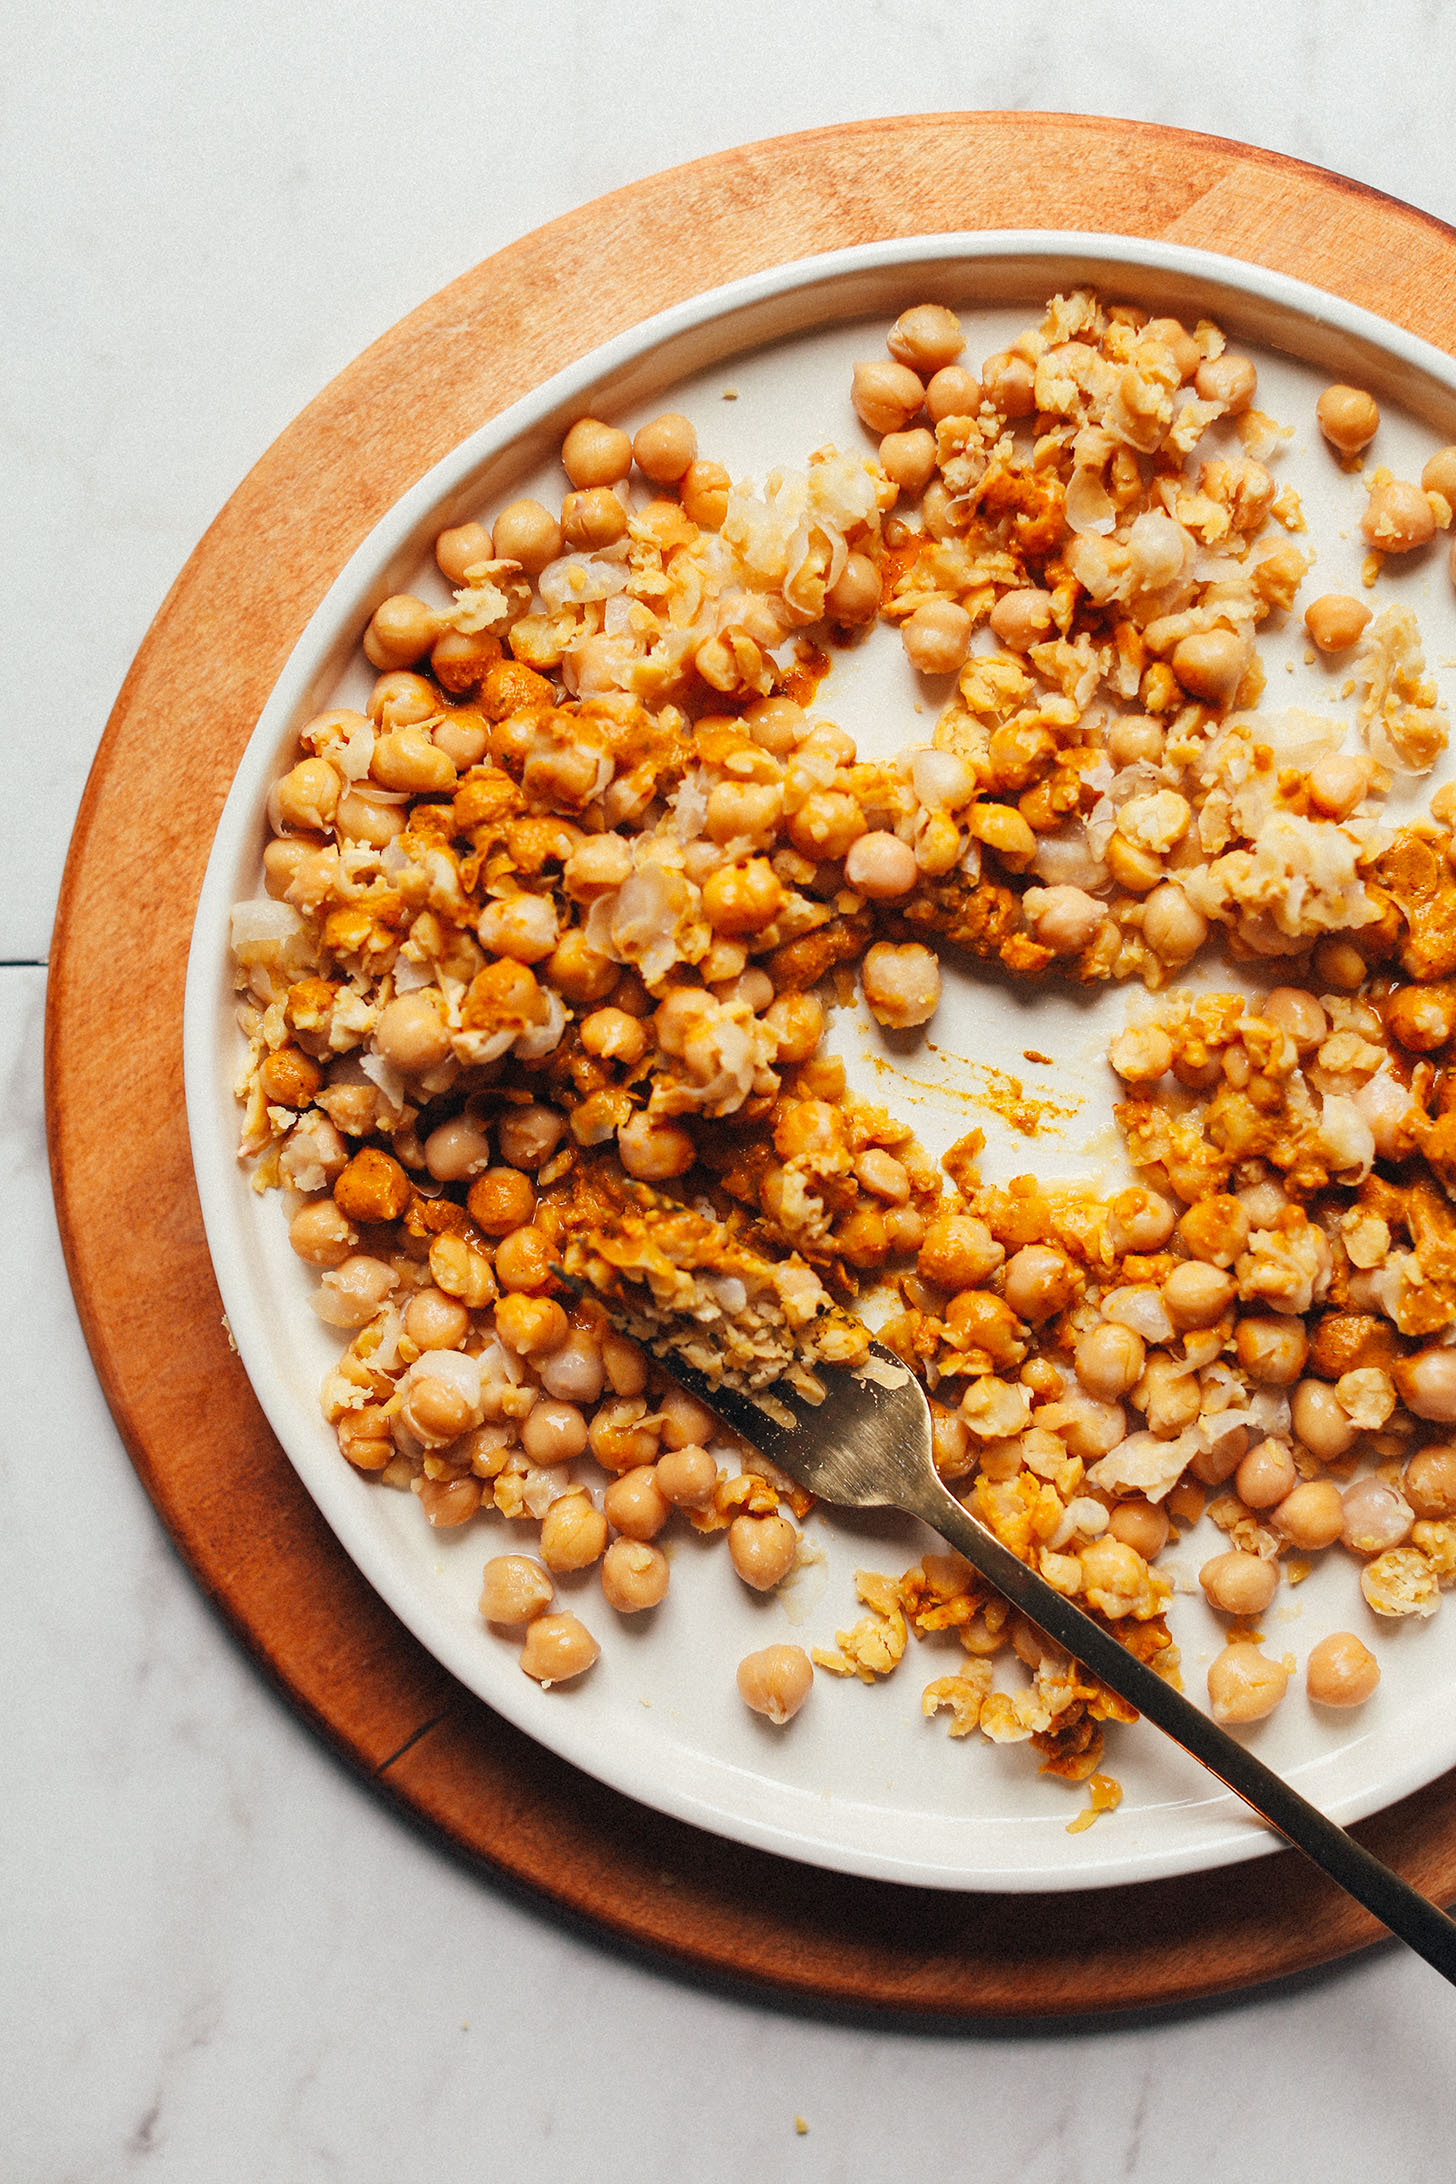 Plate with chickpeas for making gluten-free vegan Chickpea Scramble